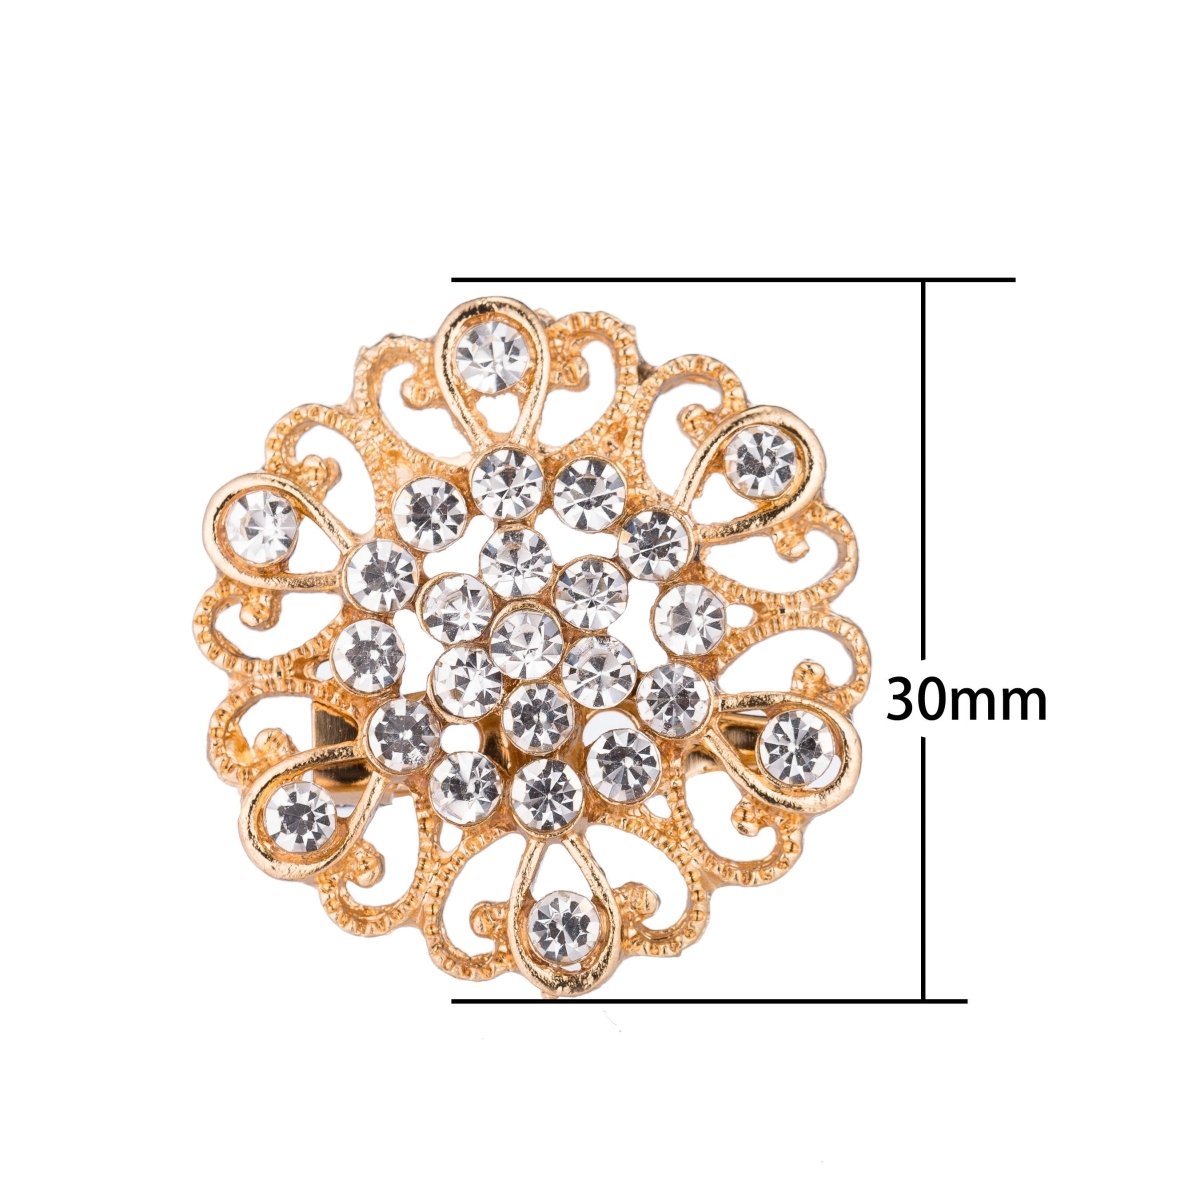 Gold Brooches Decoration Kit Wholesale Craft Supplies DIY Invitations Embellishments, Vintage Bouquet Bridal Wedding Supplies Cake Accessoy, 091918-7387 - DLUXCA